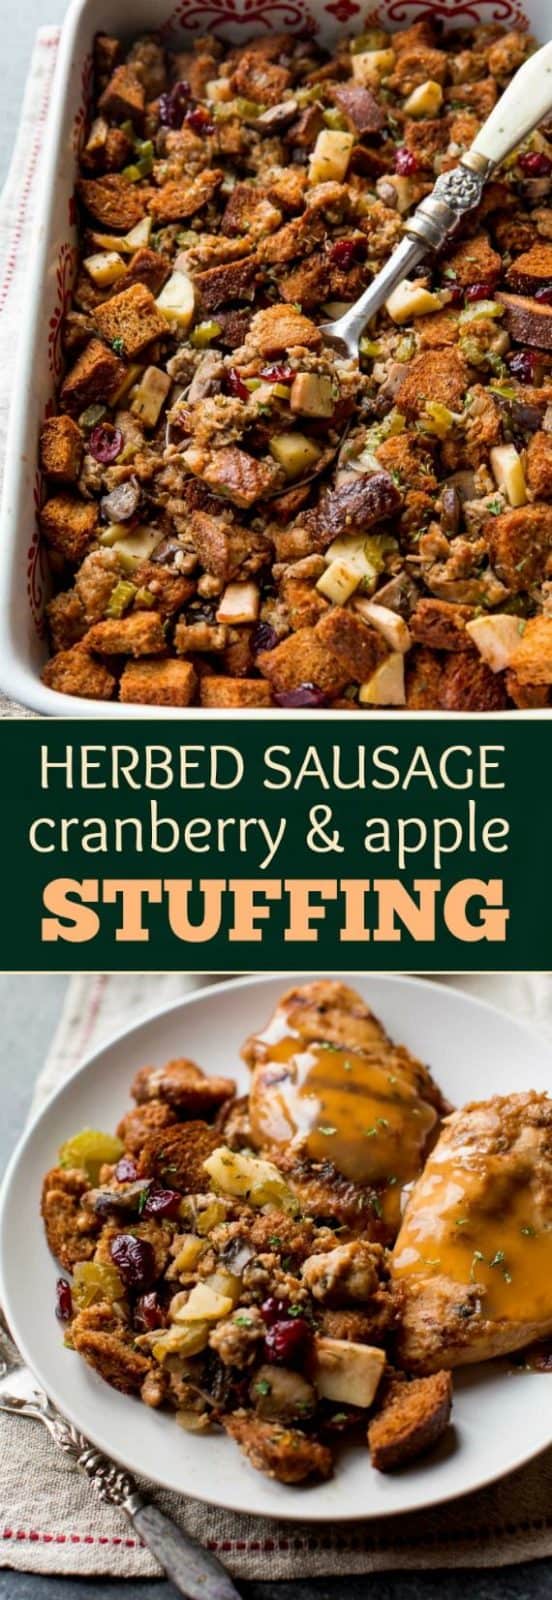 Herbed Sausage, Cranberry, and Apple Stuffing